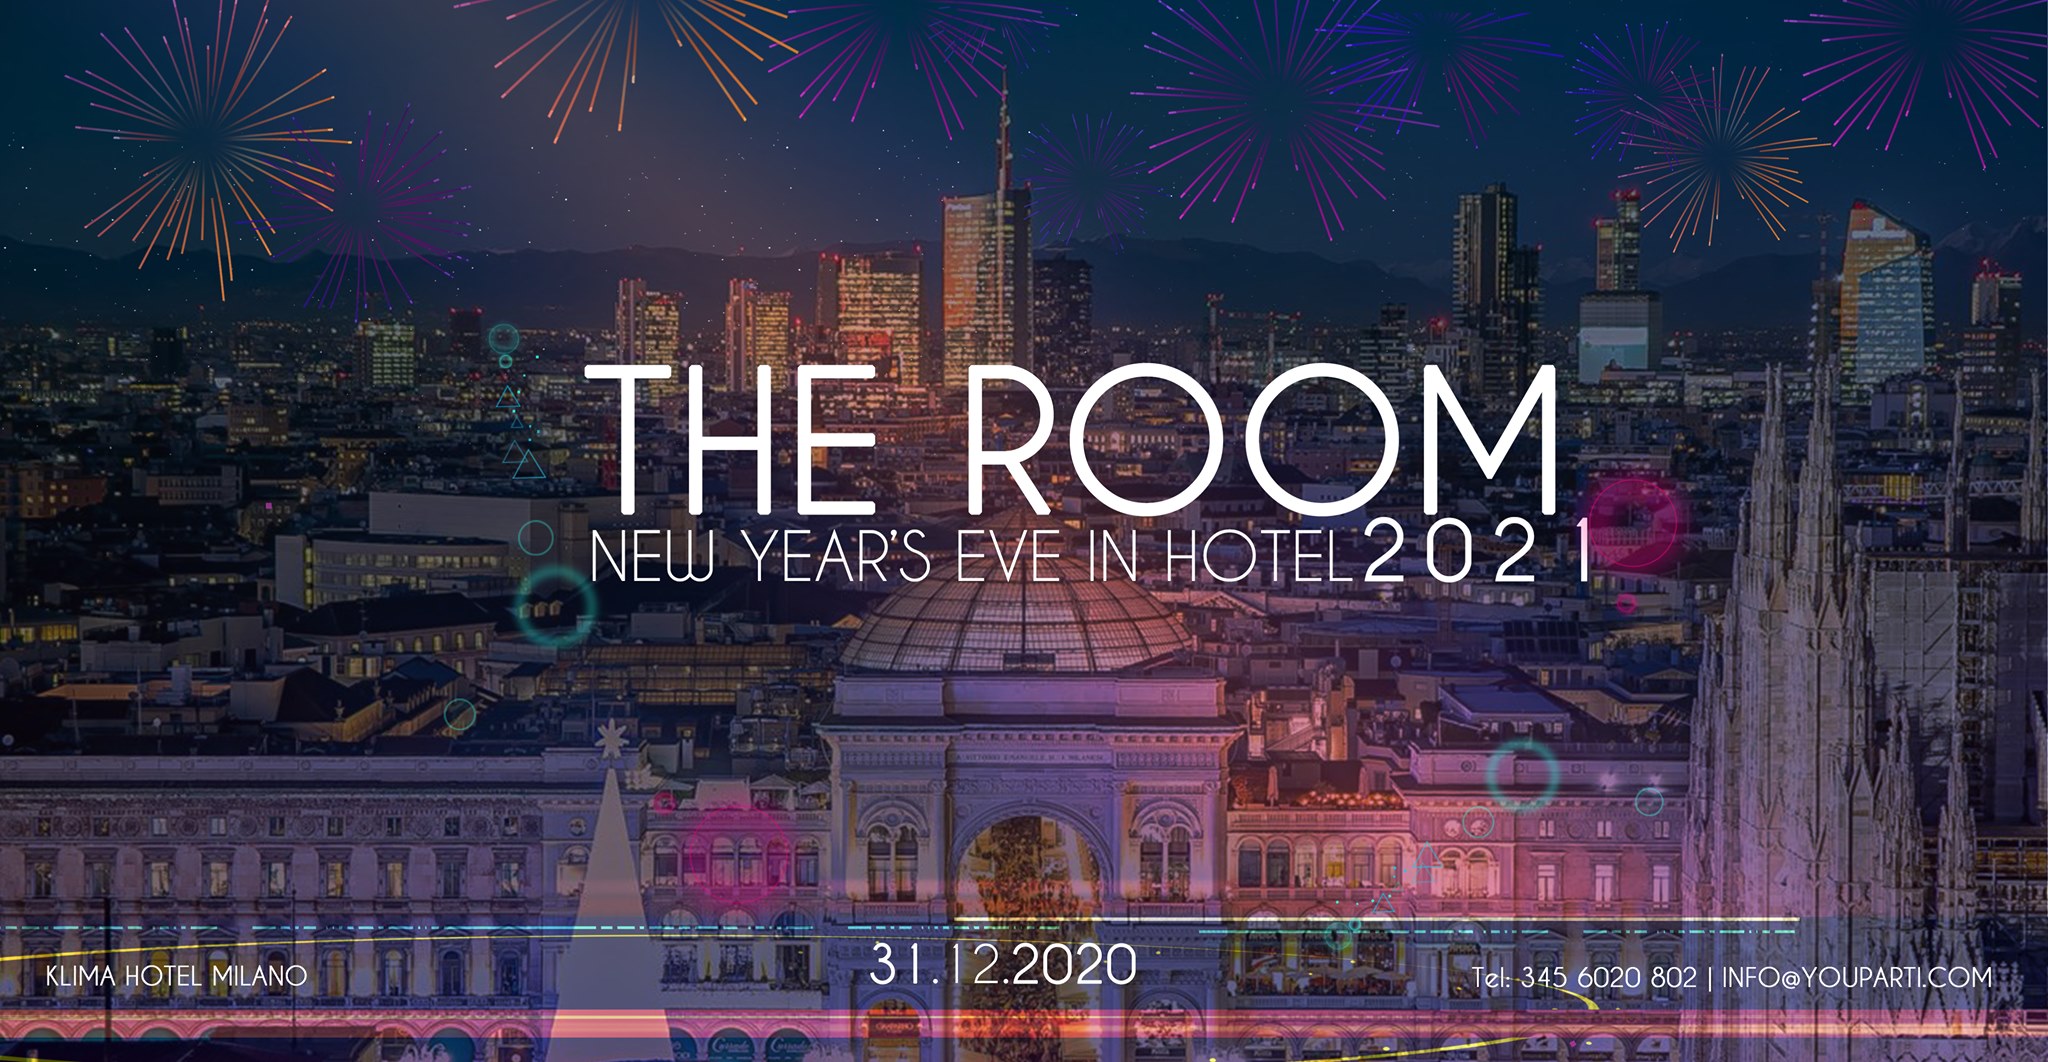 THE ROOM 2021 / New Year's Eve in Hotel YOUparti